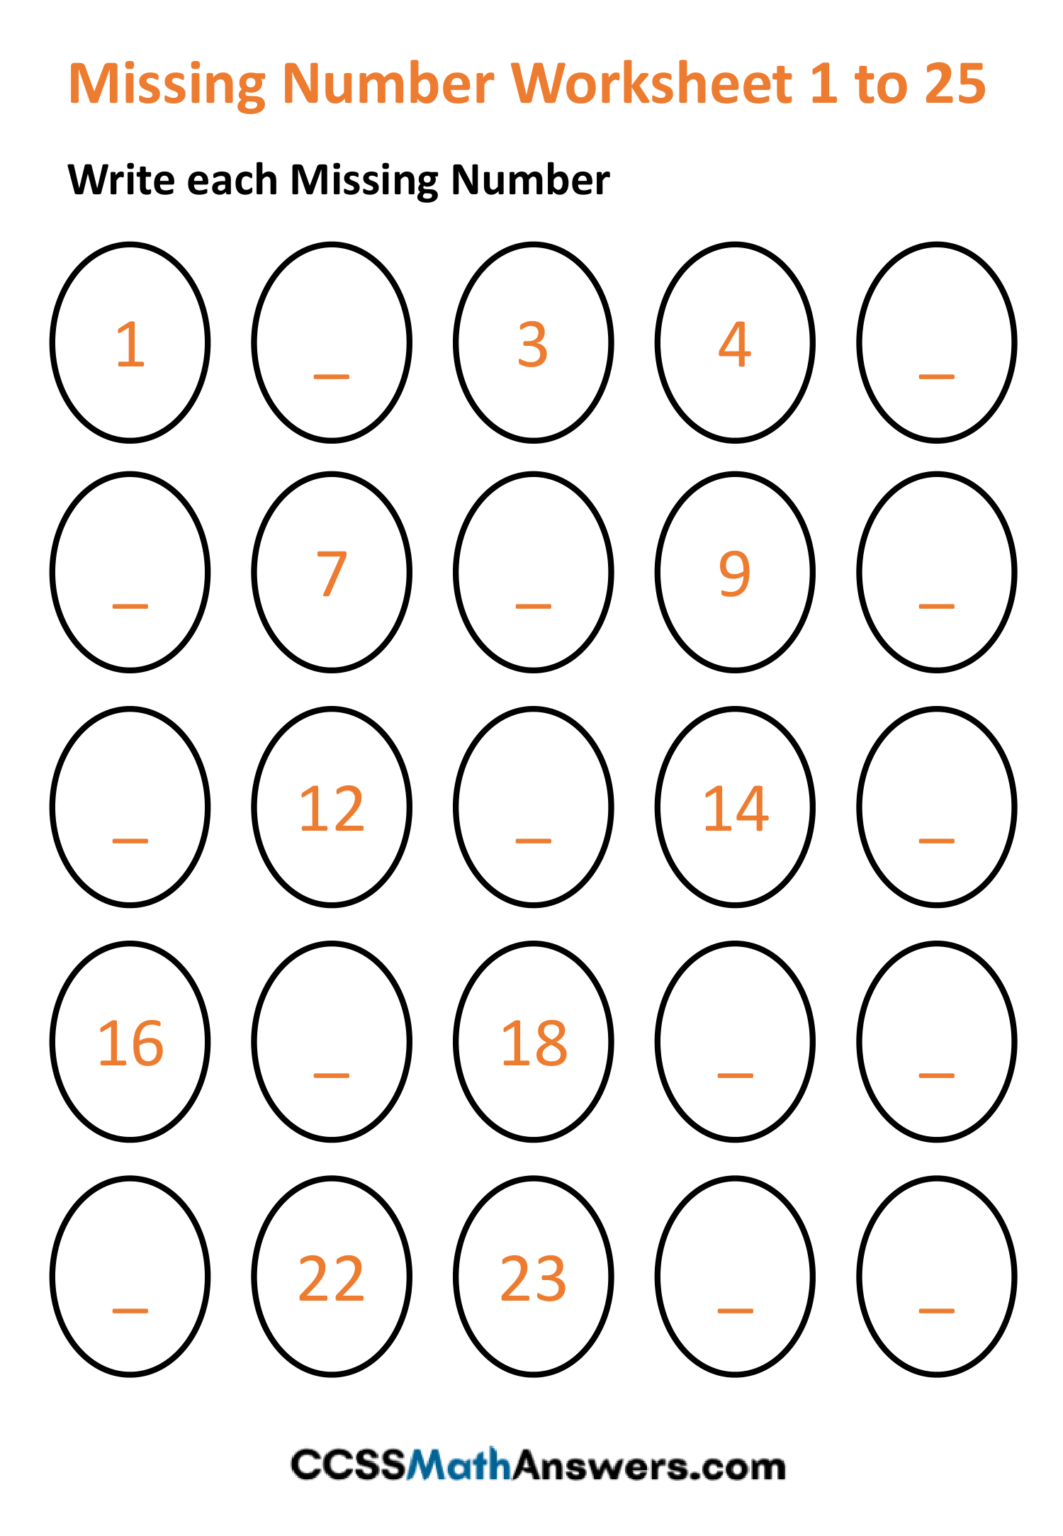 Missing Number Worksheet 1 To 50 CCSS Math Answers